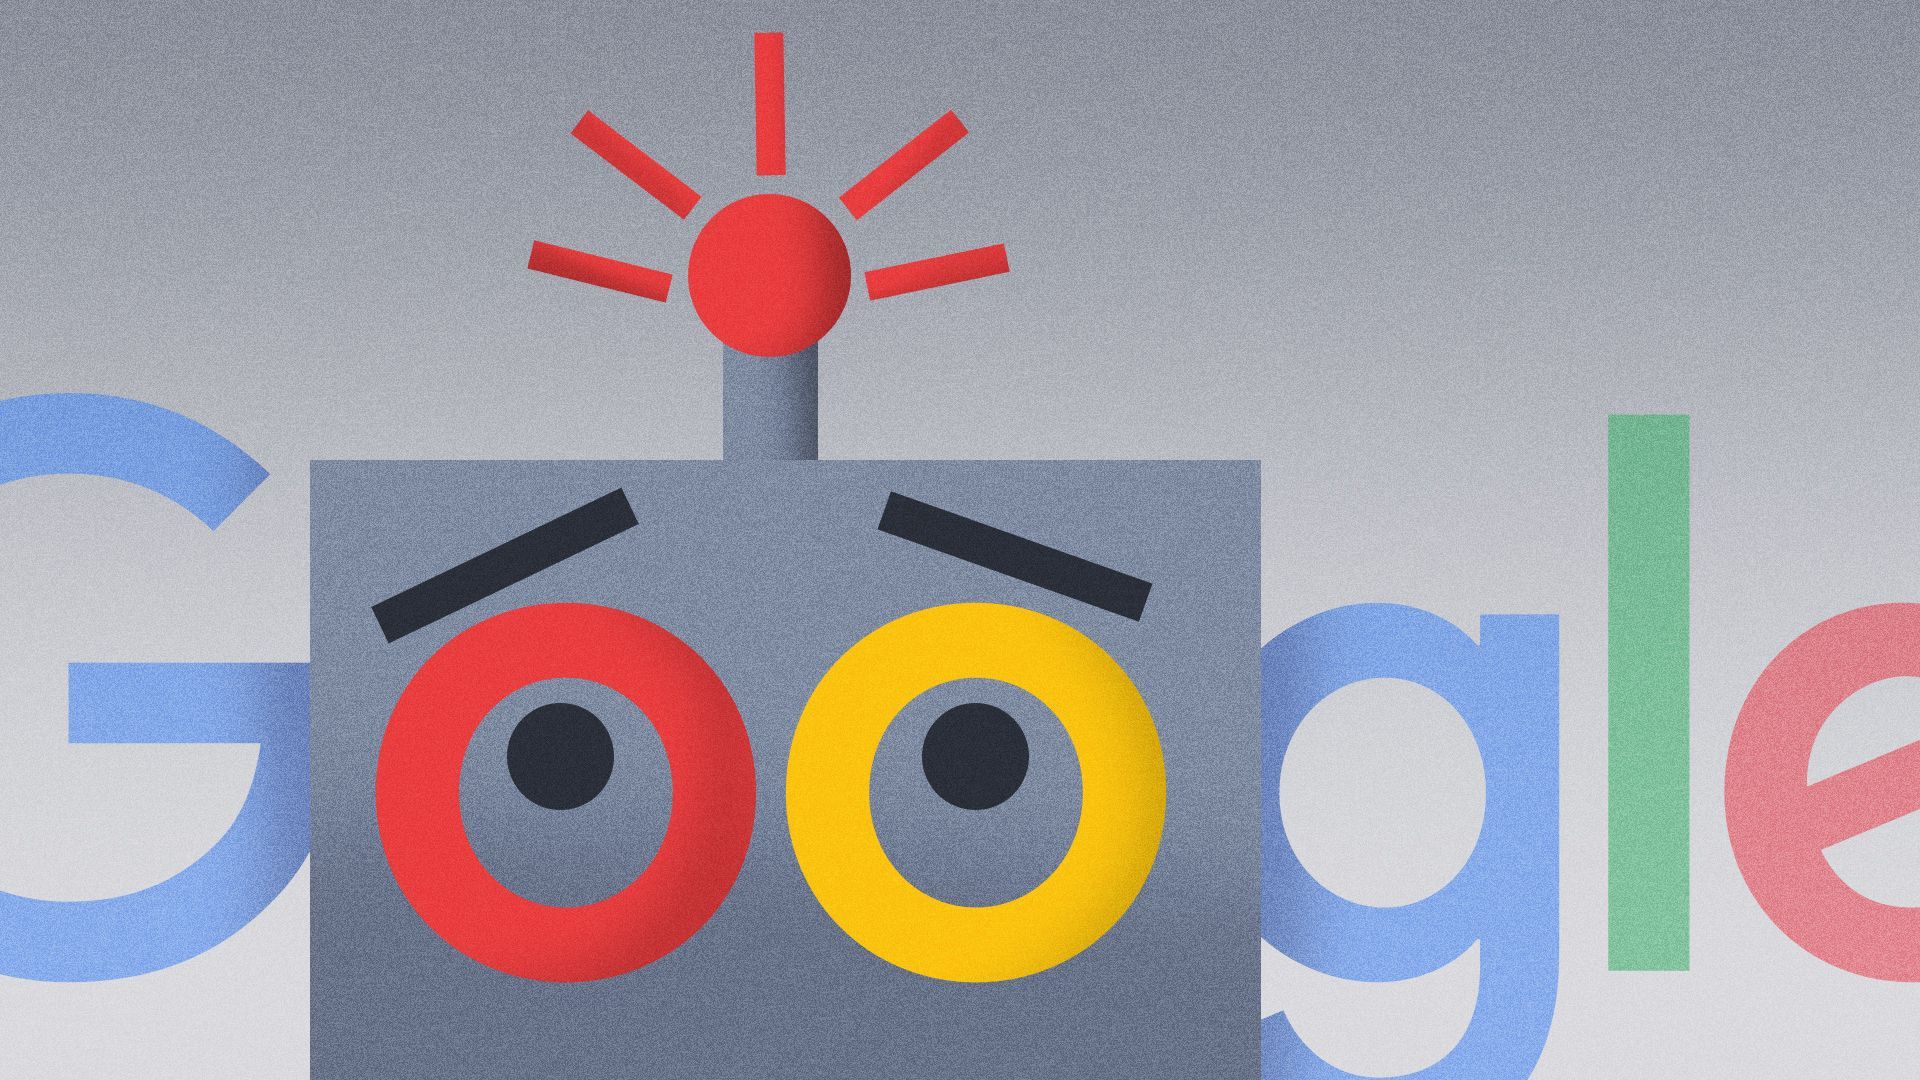 Illustration of Google's logo with the two "O's" forming the eyes of a concerned robot.